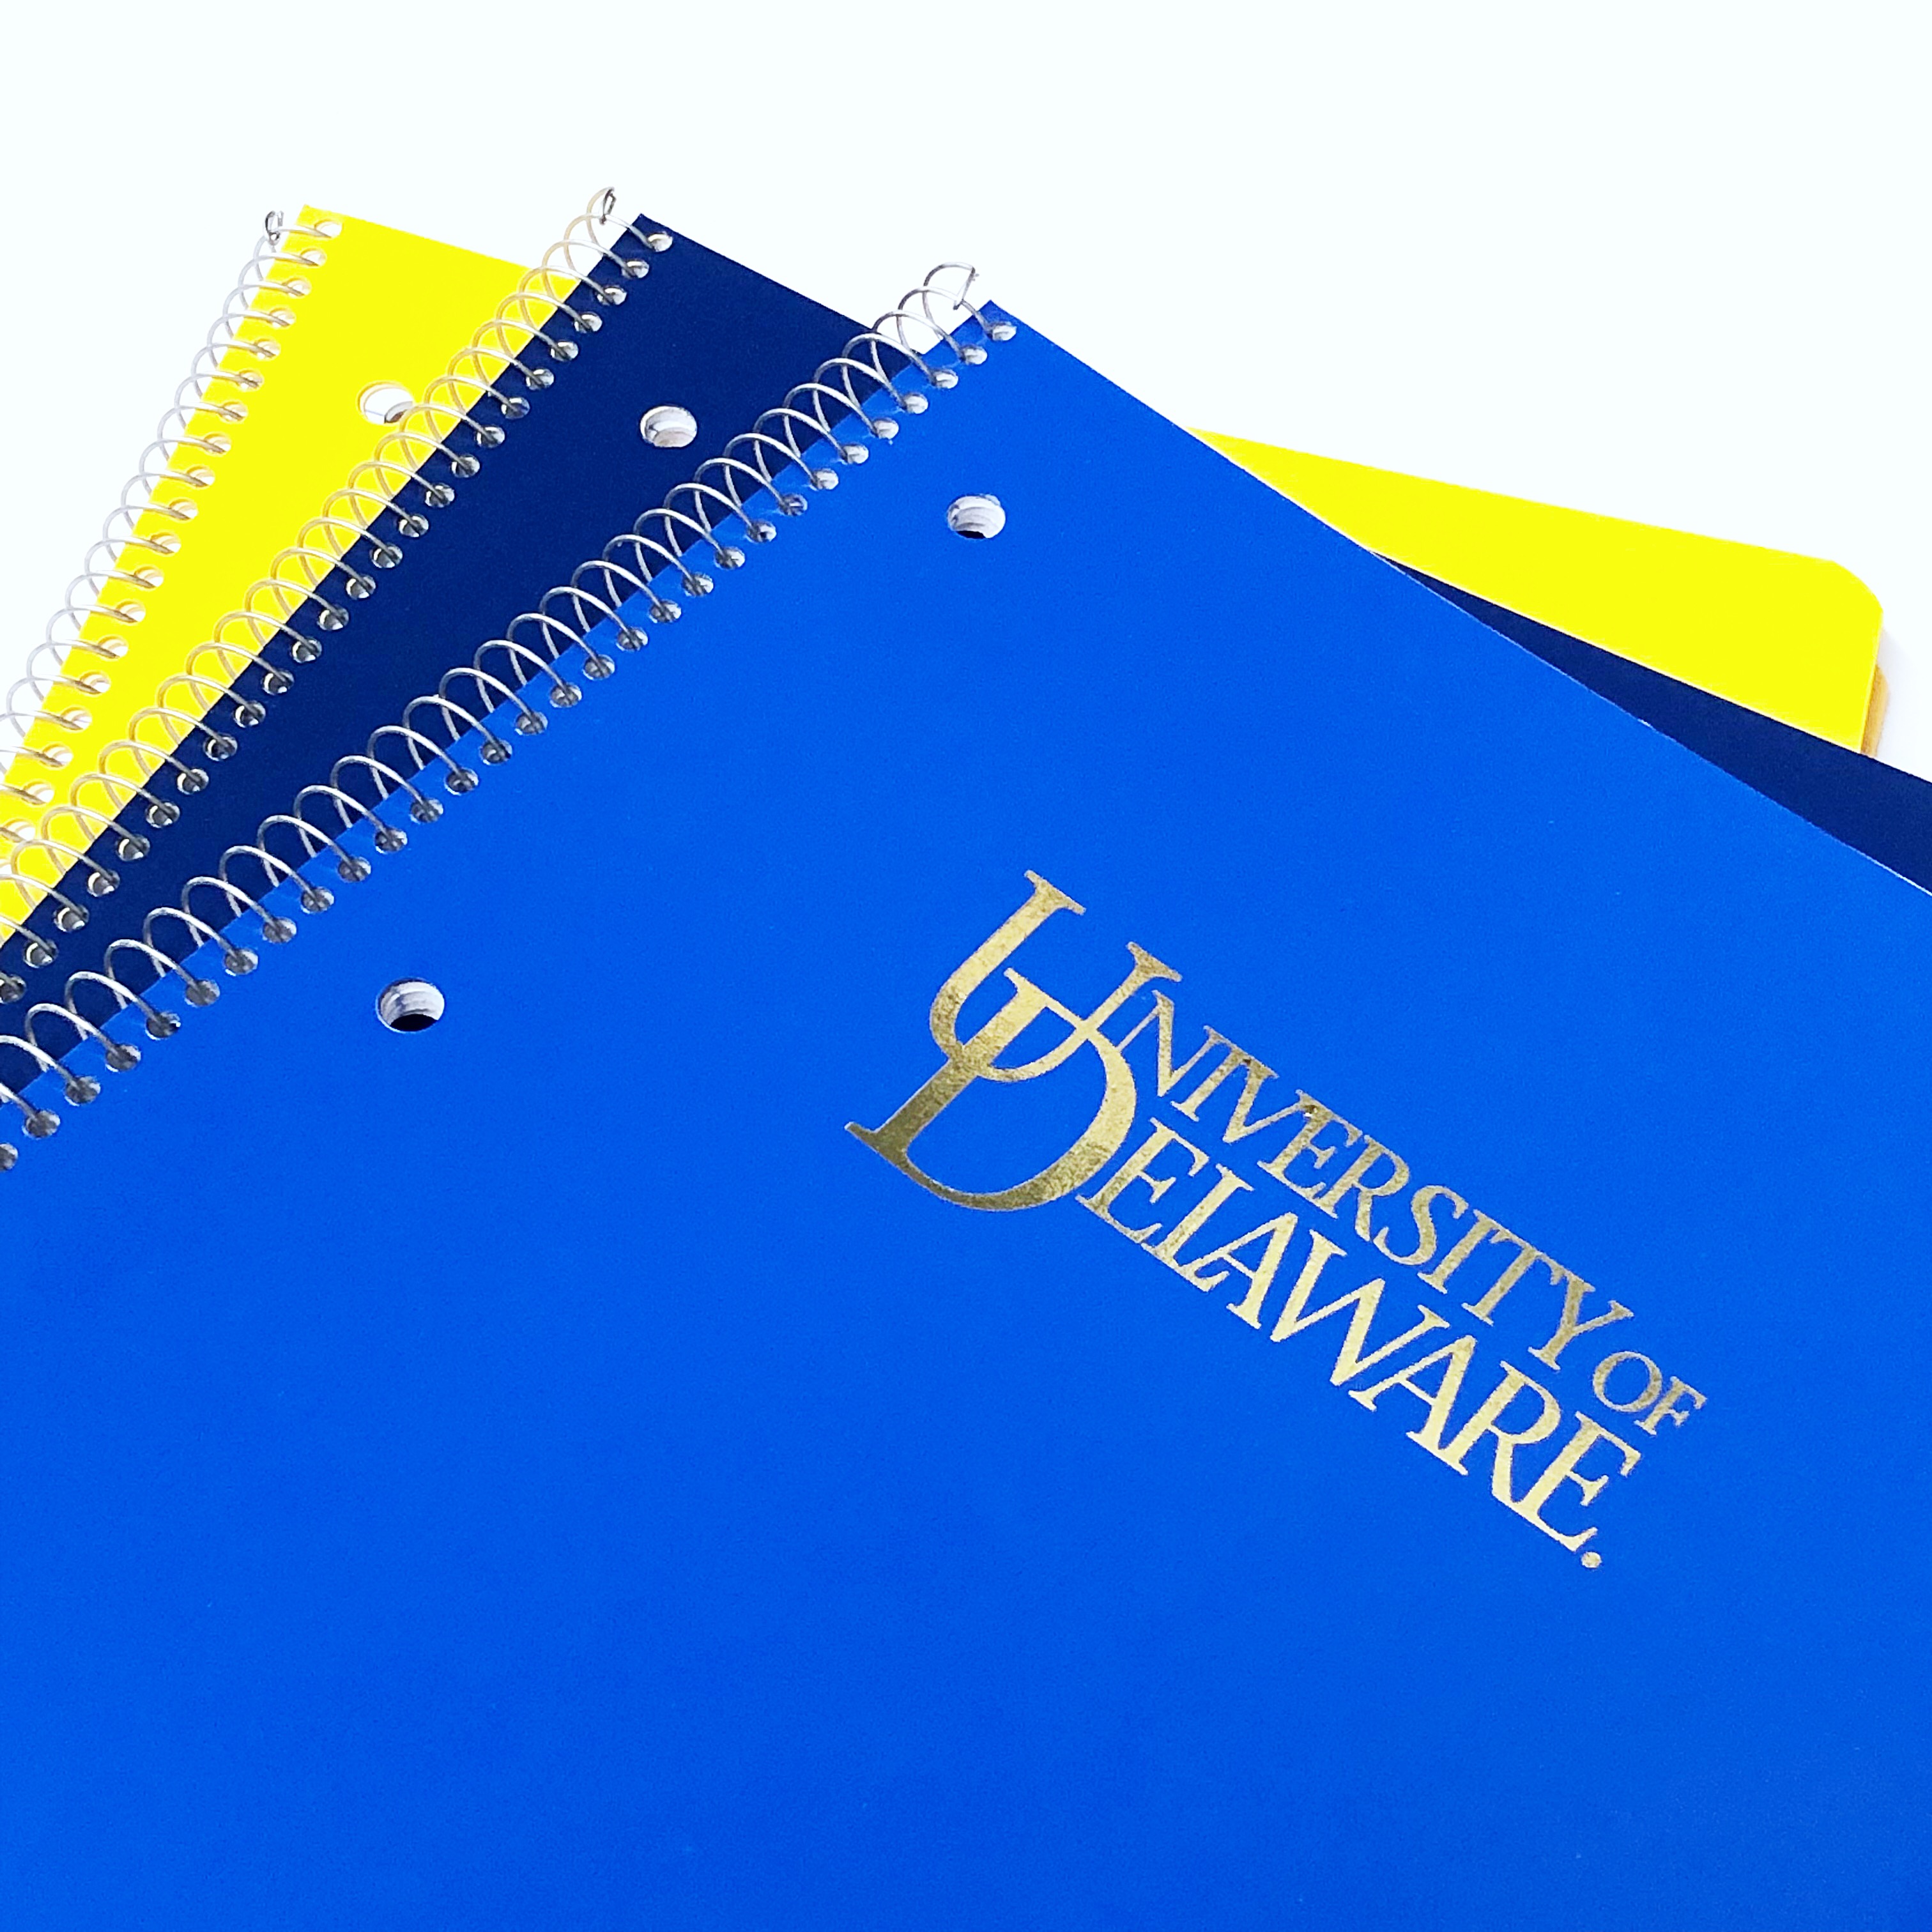 University of Delaware Classic 1Subject Spiral Notebook